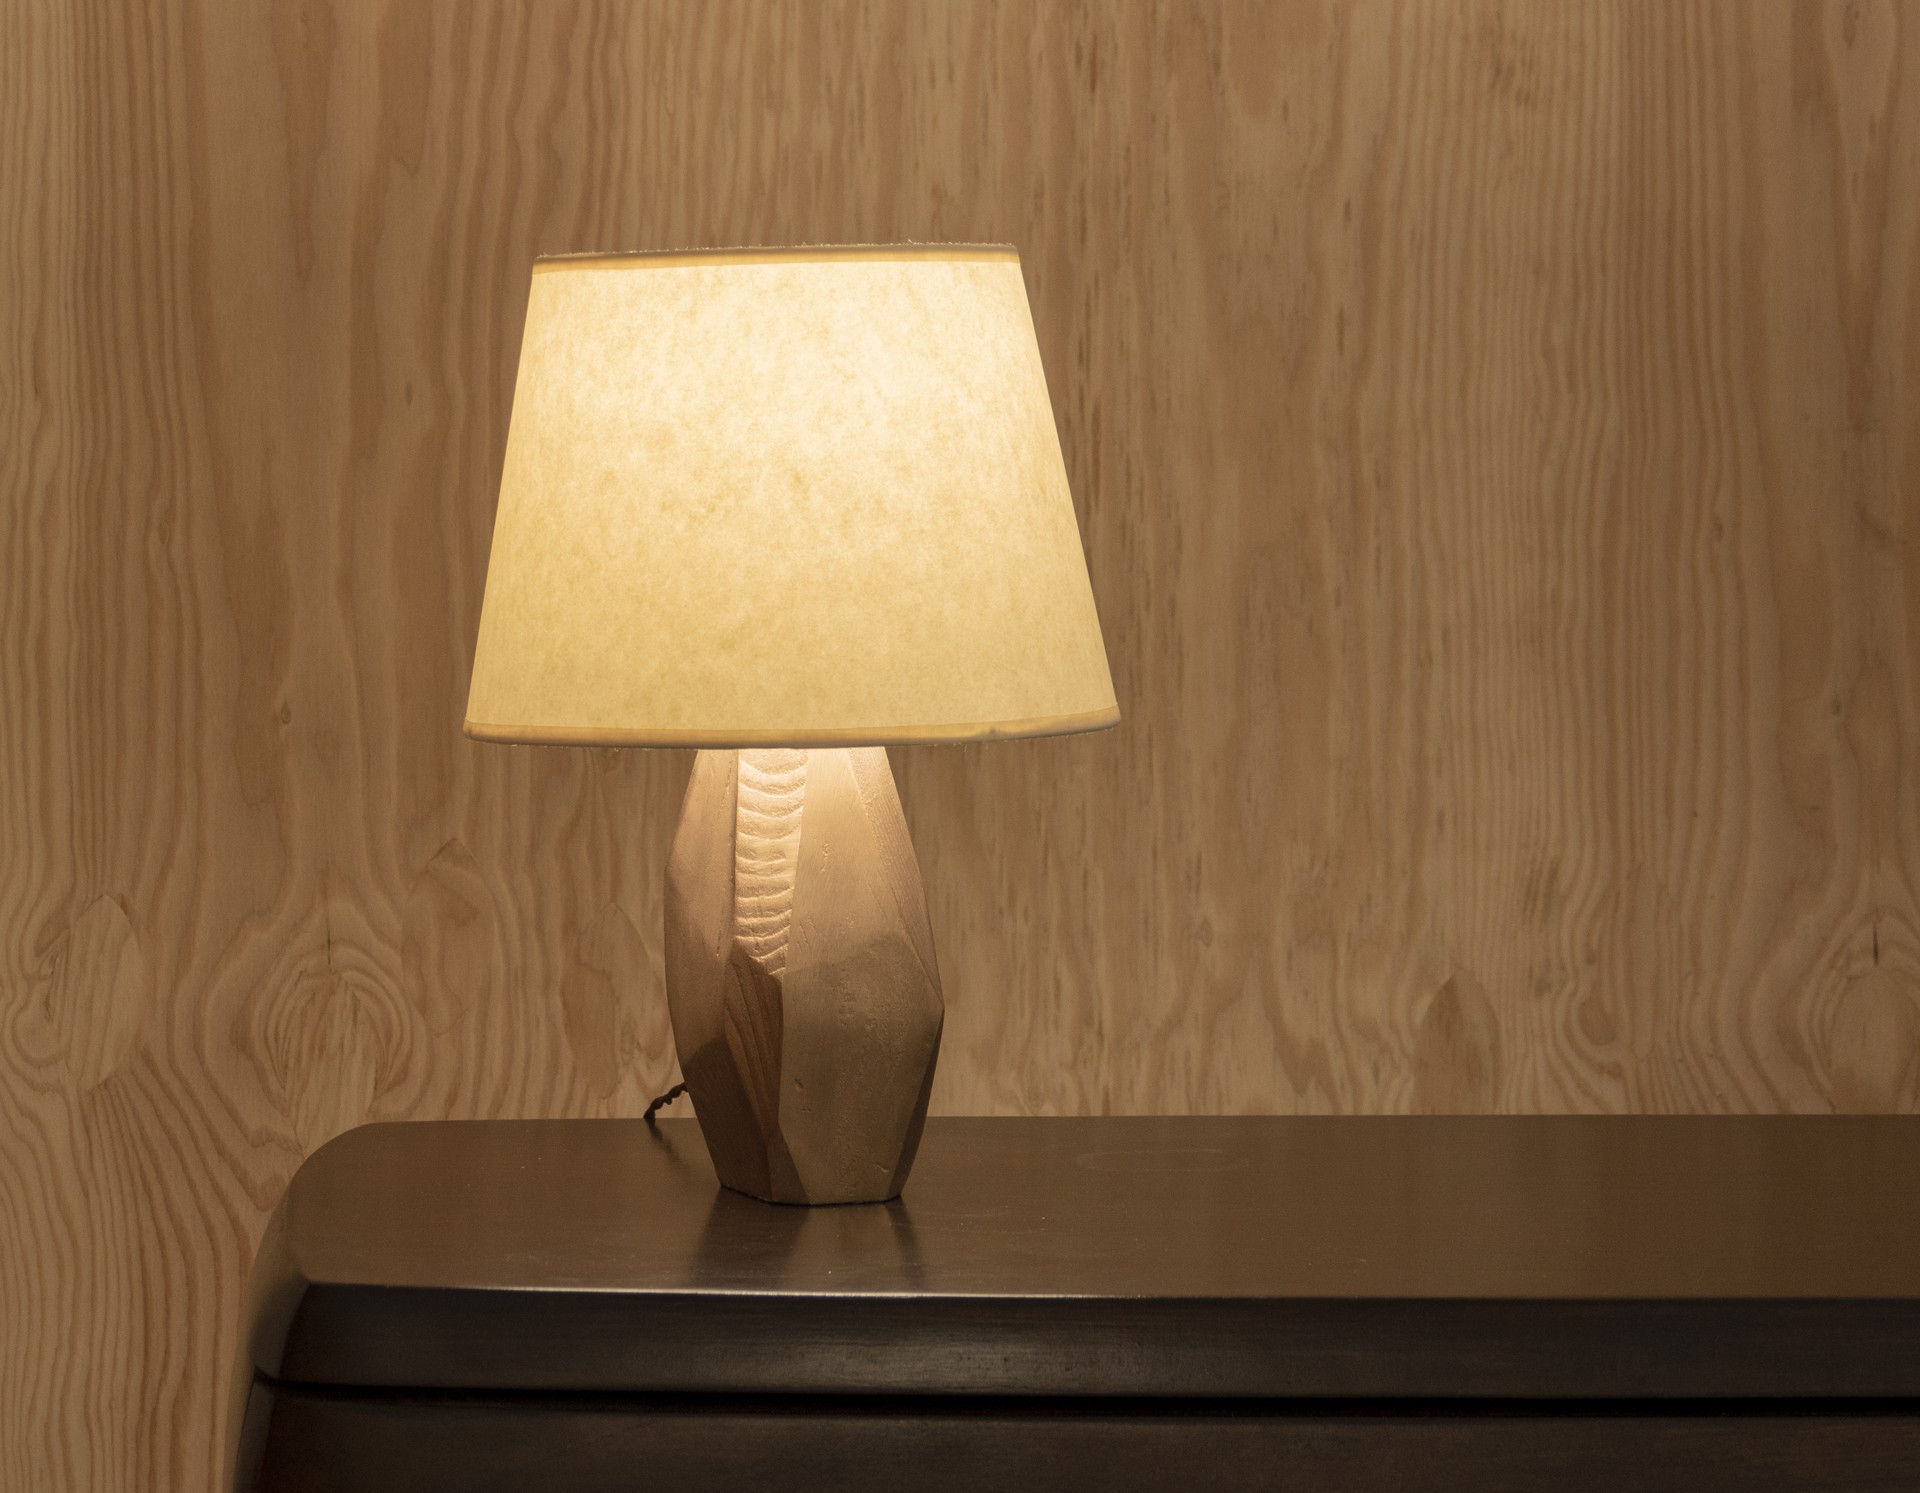 "Nazca" Table lamp by Jacques Jarrige